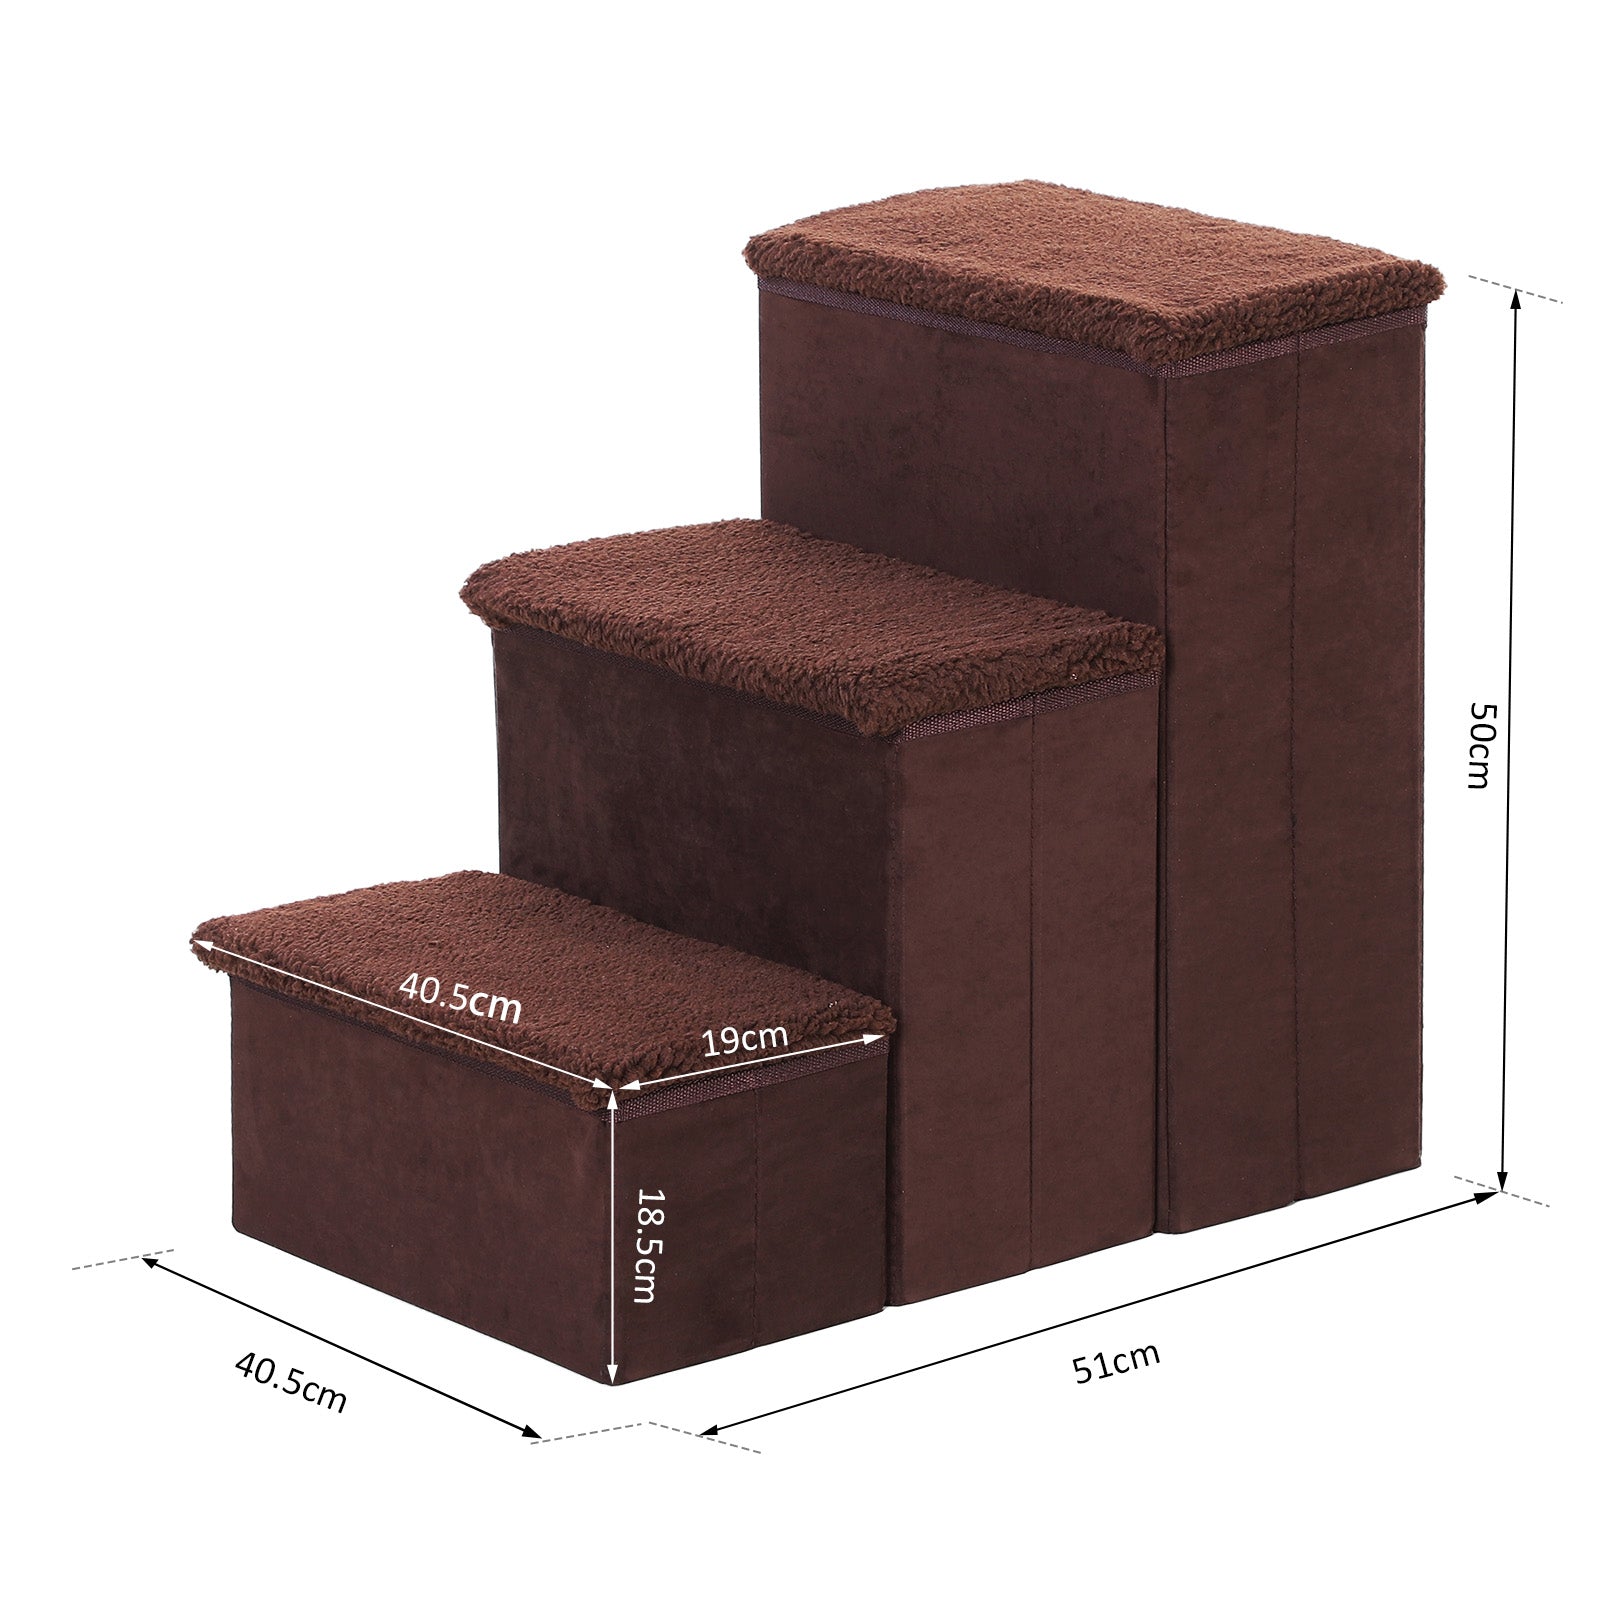 3 Step Pet Stairs Foldable Portable Mobility Assistance w/ Washable Fleece Cover 41x19cm Brown